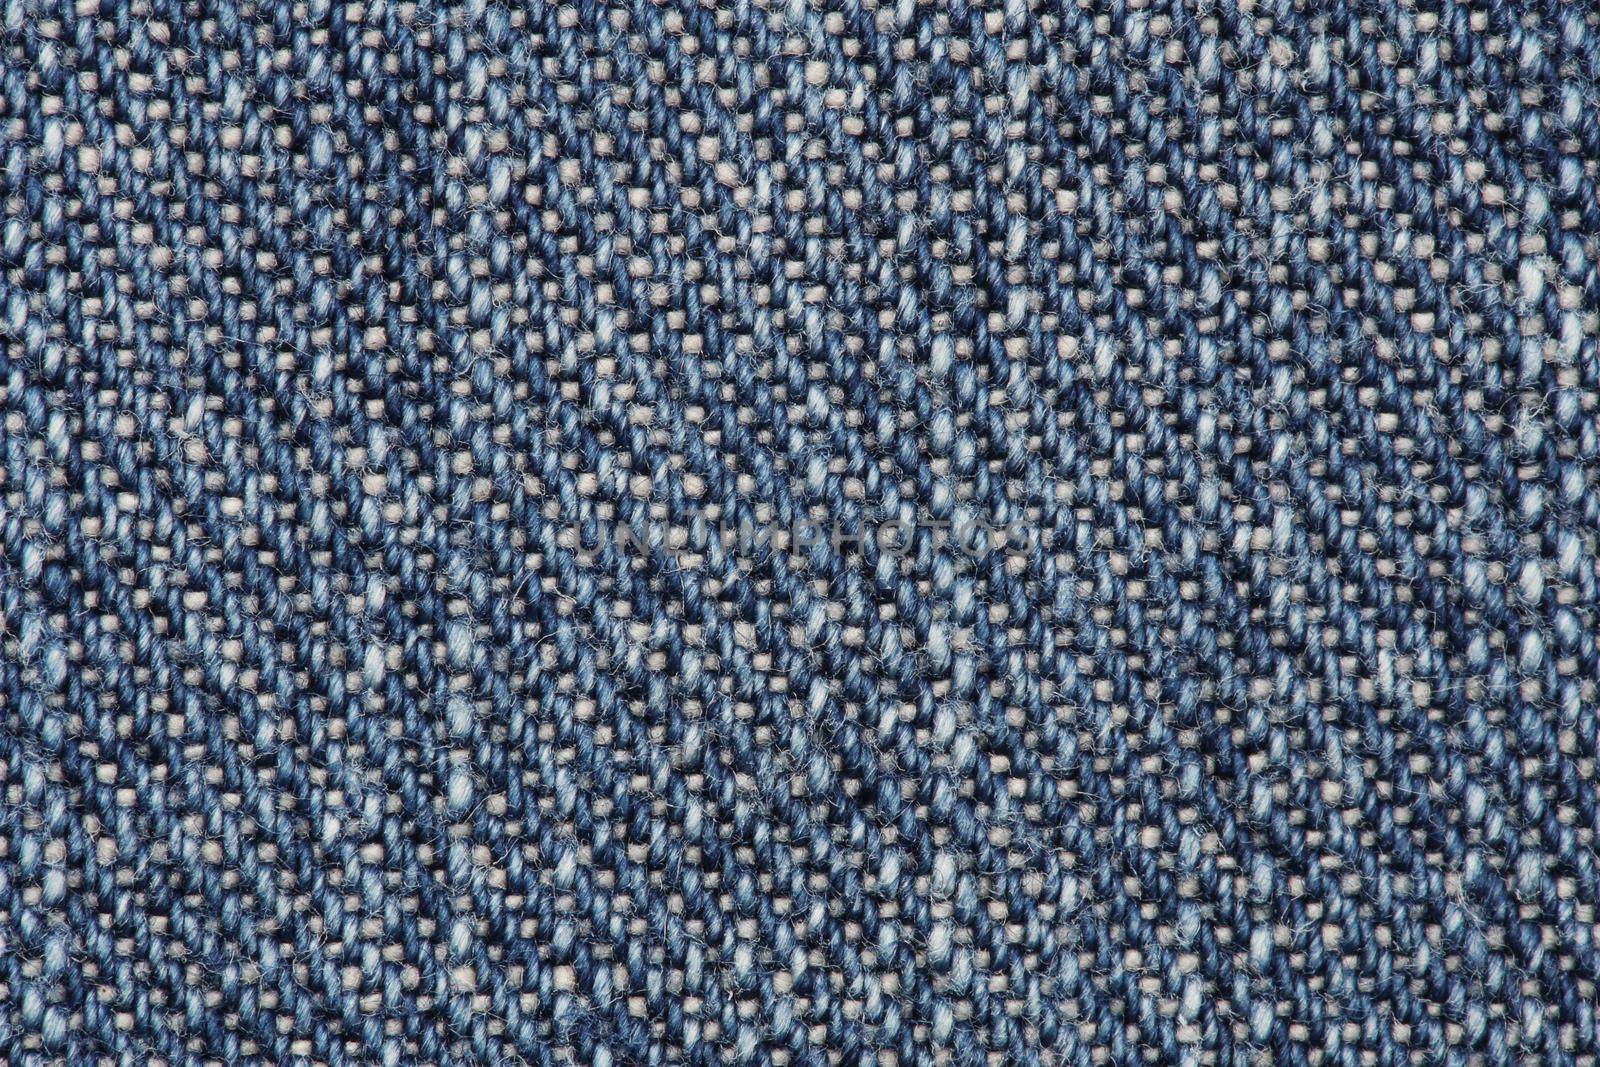 Close up of blue jeans texture background